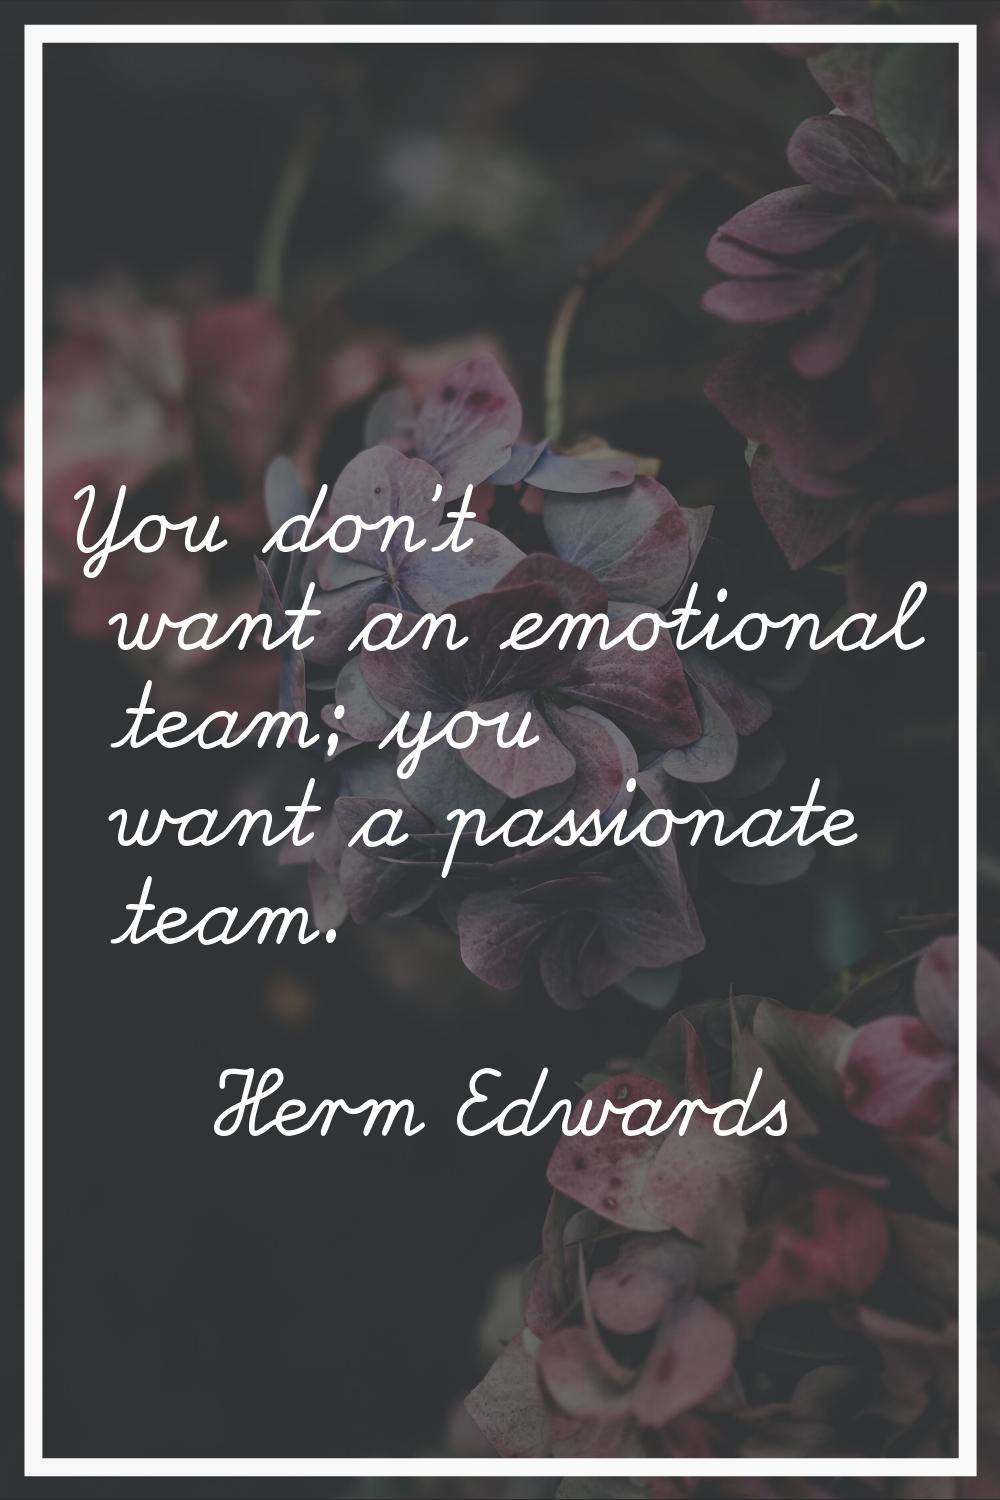 You don't want an emotional team; you want a passionate team.